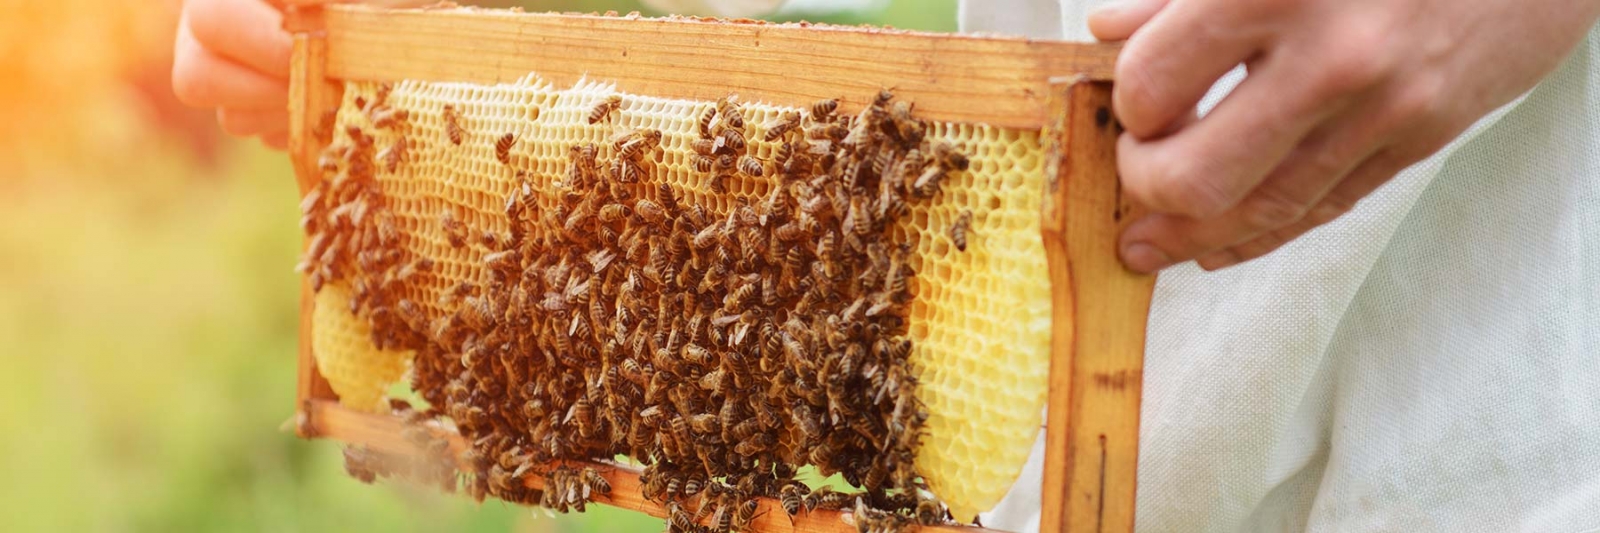 beekeeper holding honey cell